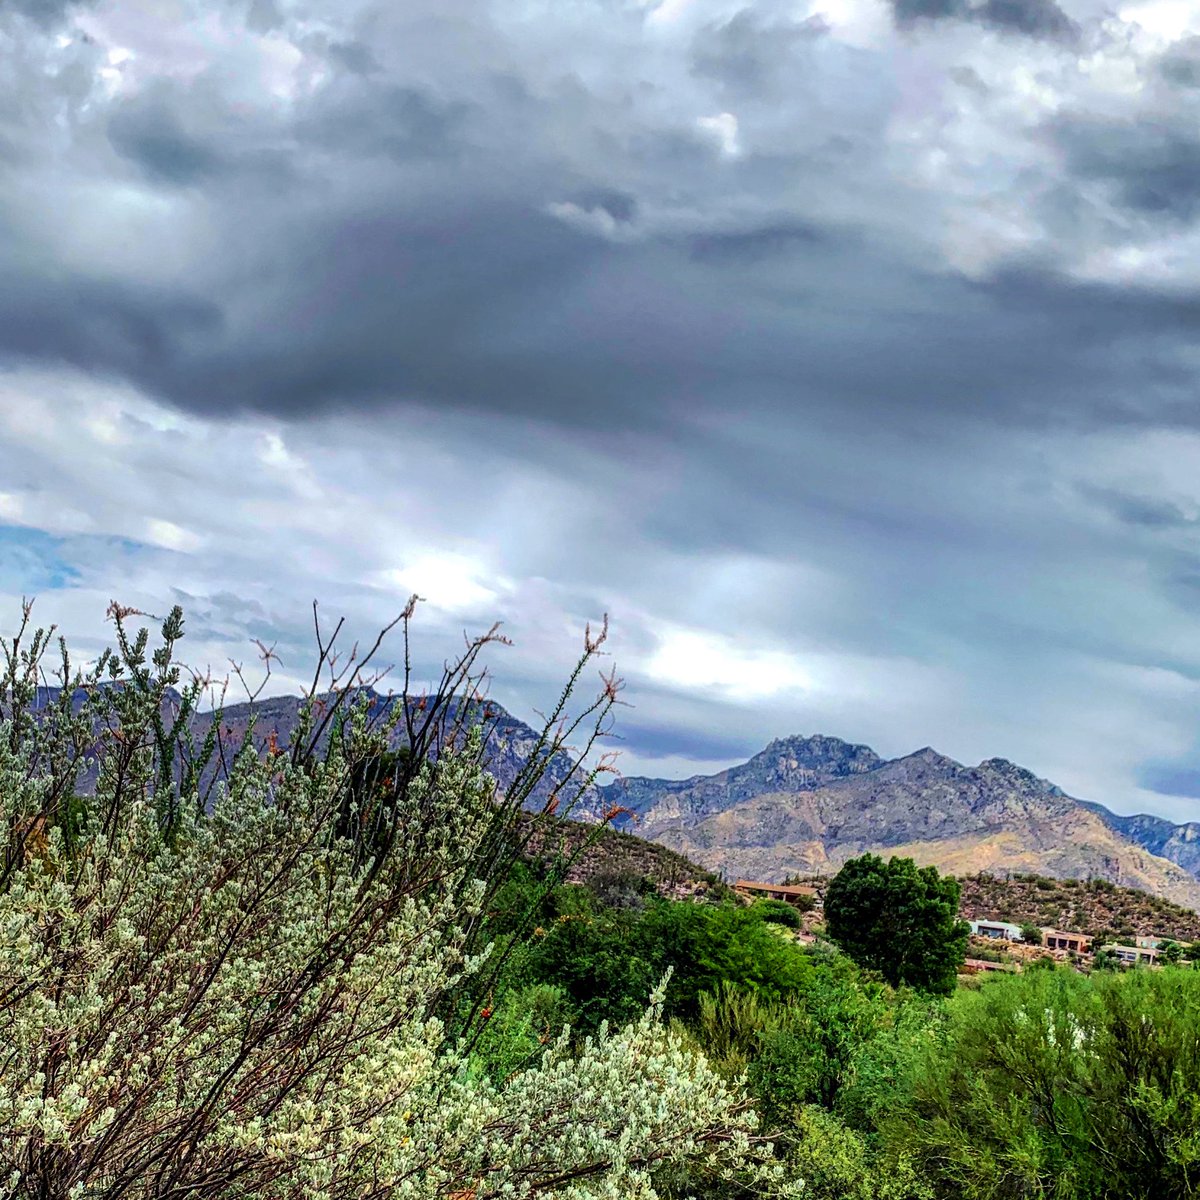 Happy Sunday, #Tucson! 102 and partly cloudy today. Chillin’ in the #foothills this morning taking it easy for a change. Admiring the monsoon-teasing clouds and the natural beauty of our #SantaCatalinas. Treasuring every moment. #keepsafe @VisitTucsonAZ #visittucson